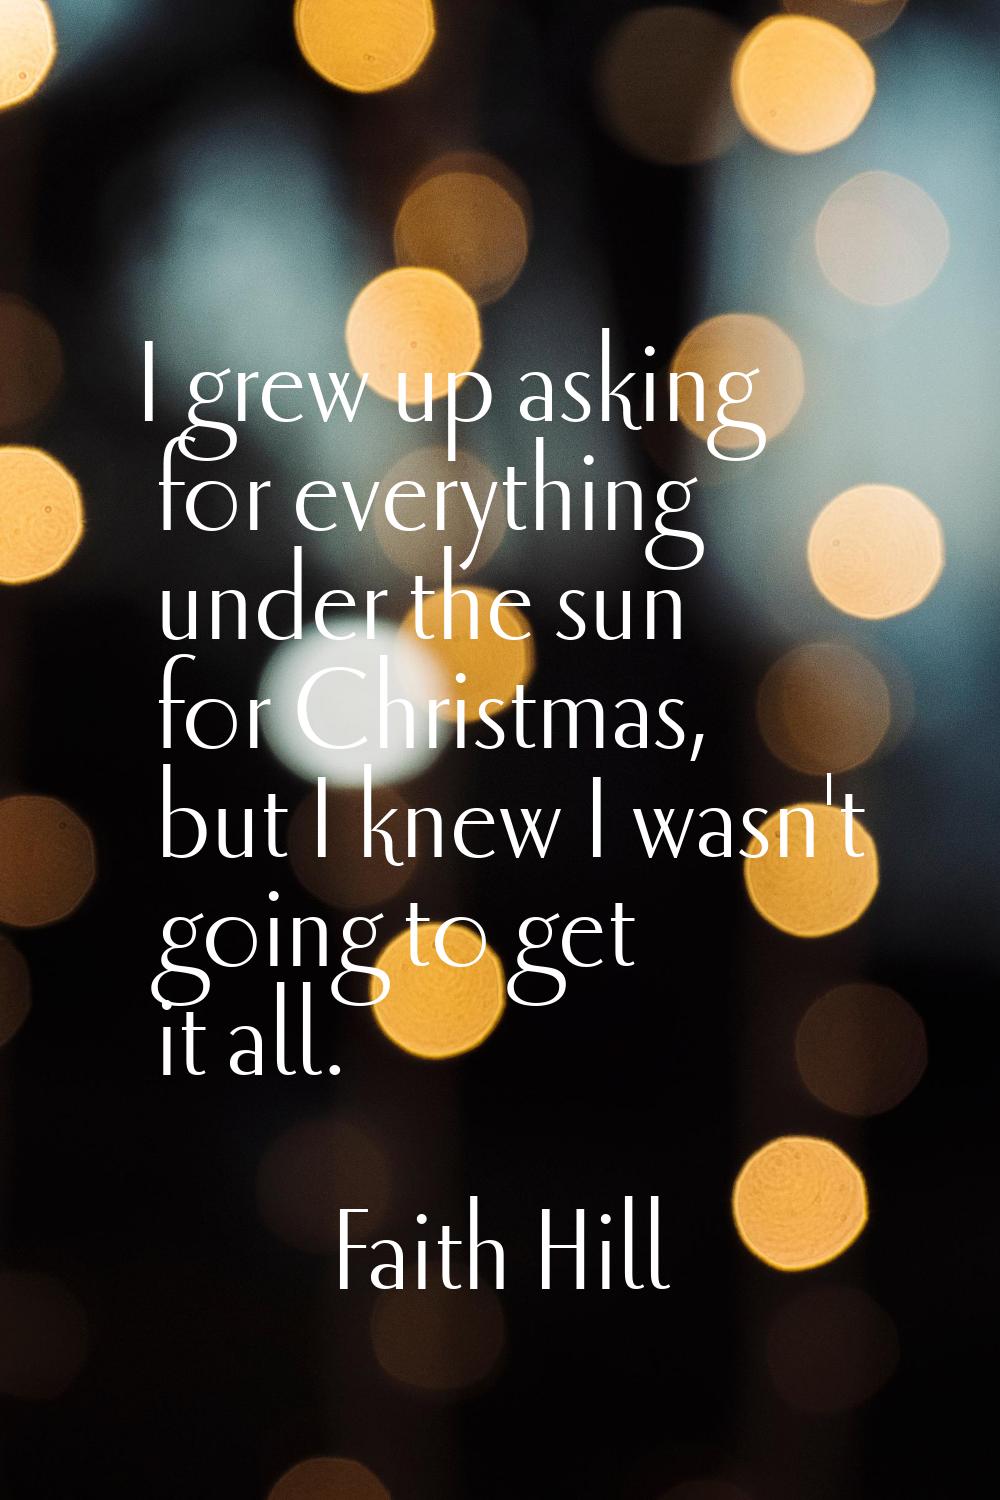 I grew up asking for everything under the sun for Christmas, but I knew I wasn't going to get it al